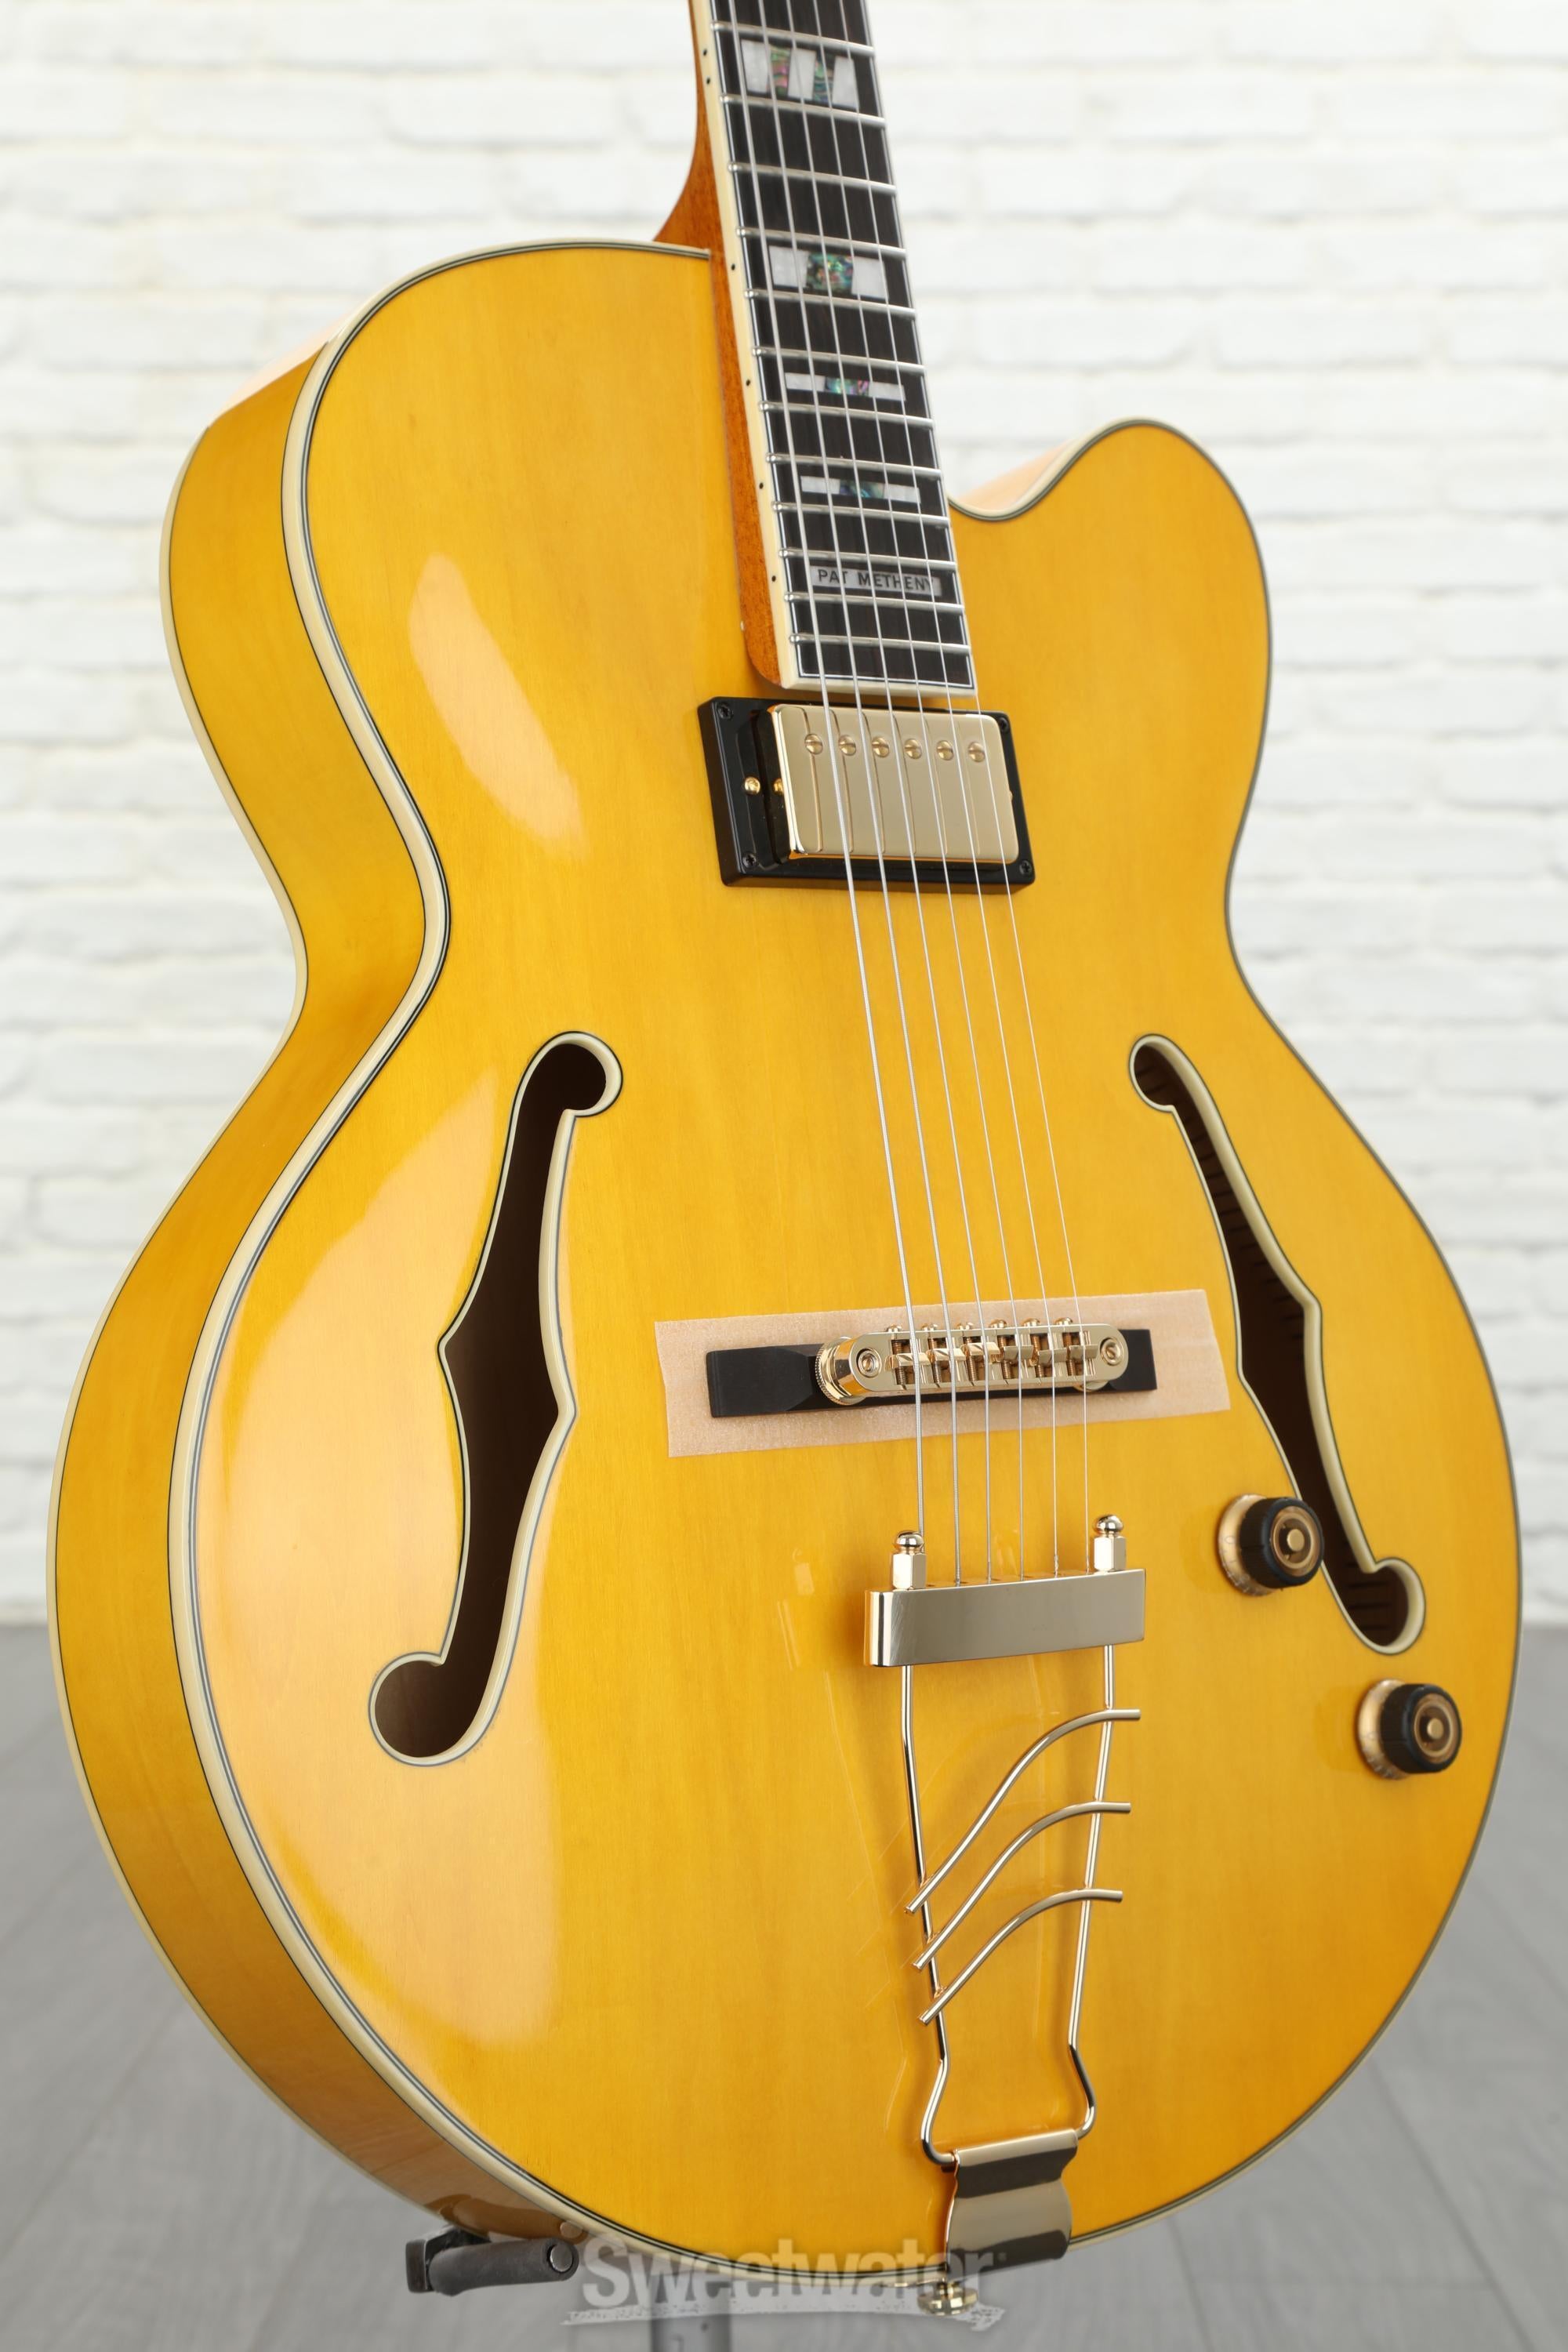 Ibanez Pat Metheny Signature PM2 - Antique Amber Reviews | Sweetwater